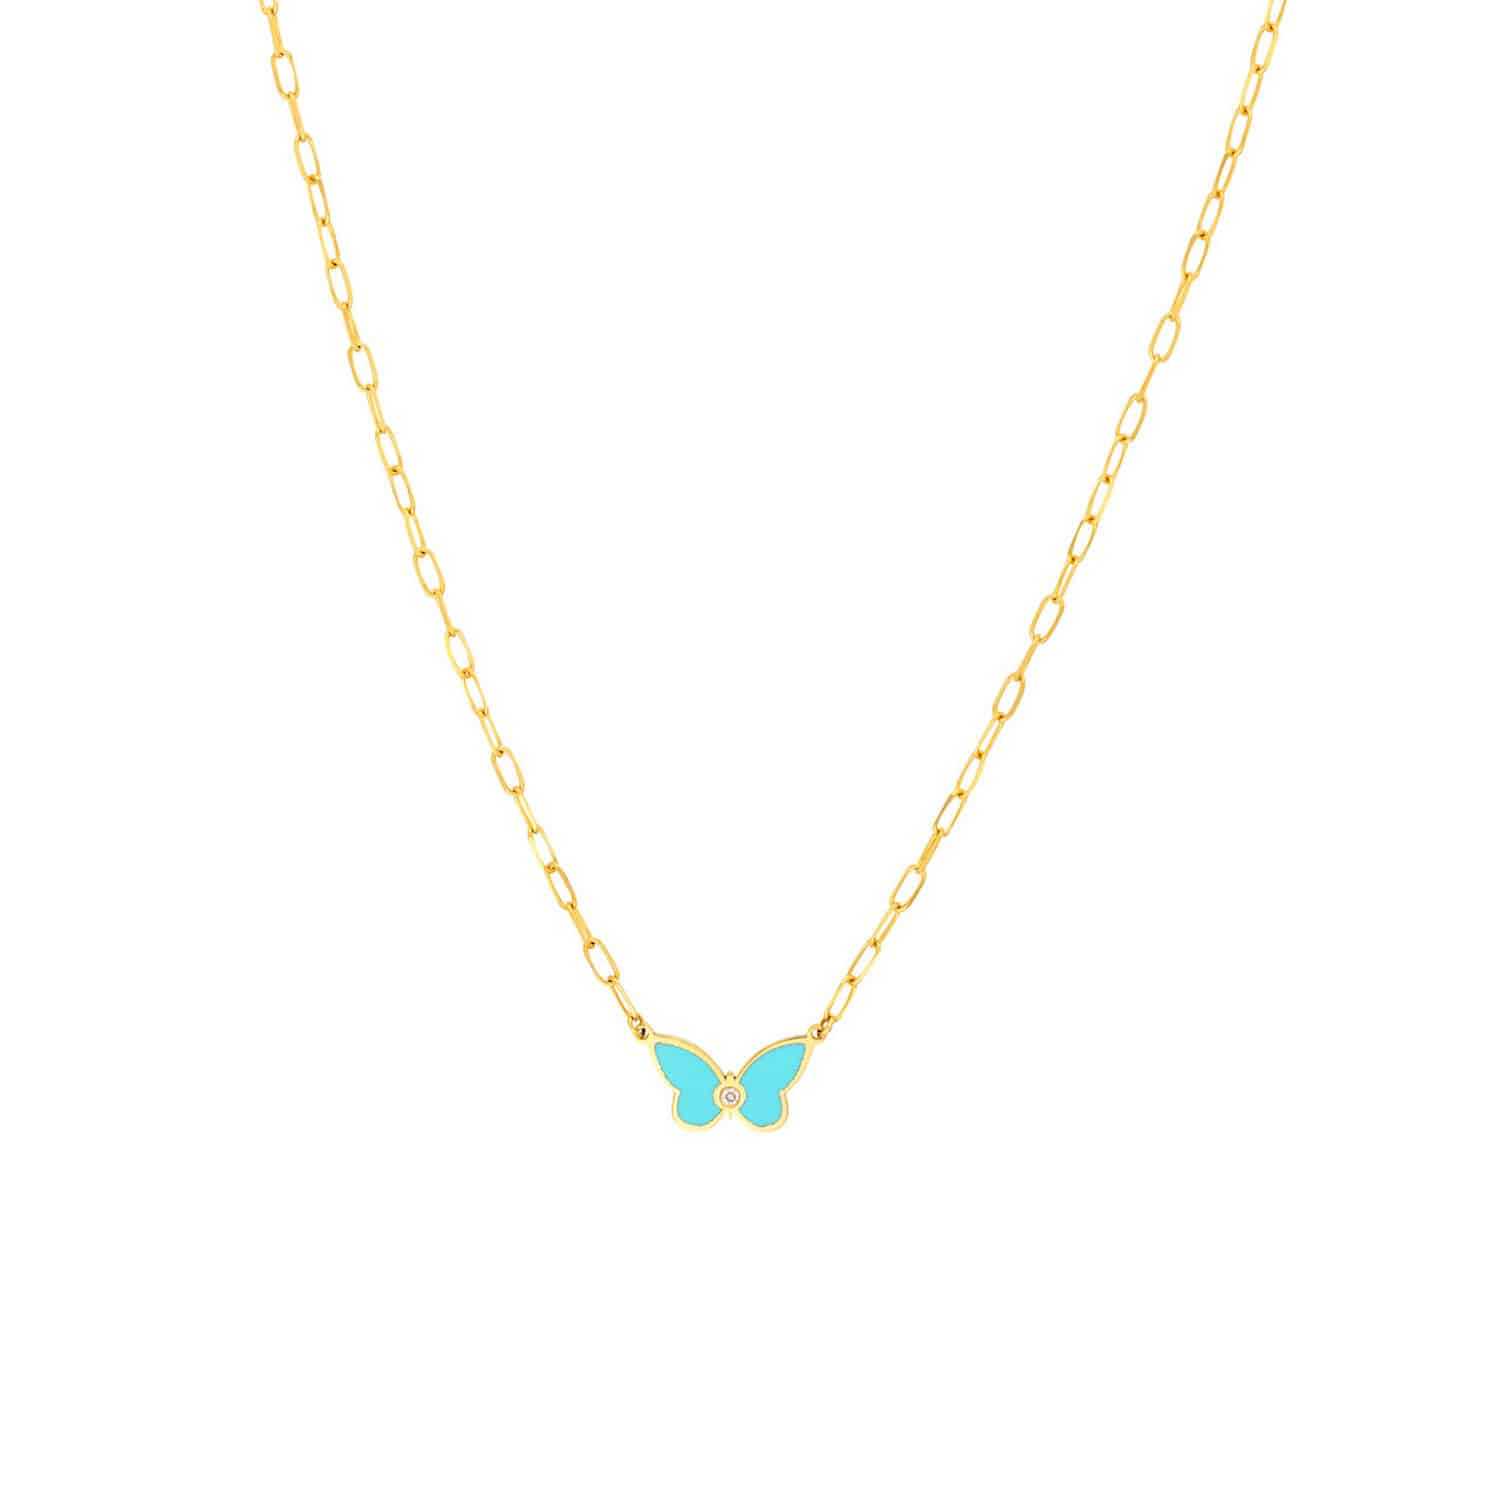 Natural Diamond 14K Yellow Gold Light Turquoise Butterfly Pendant Necklace 18"